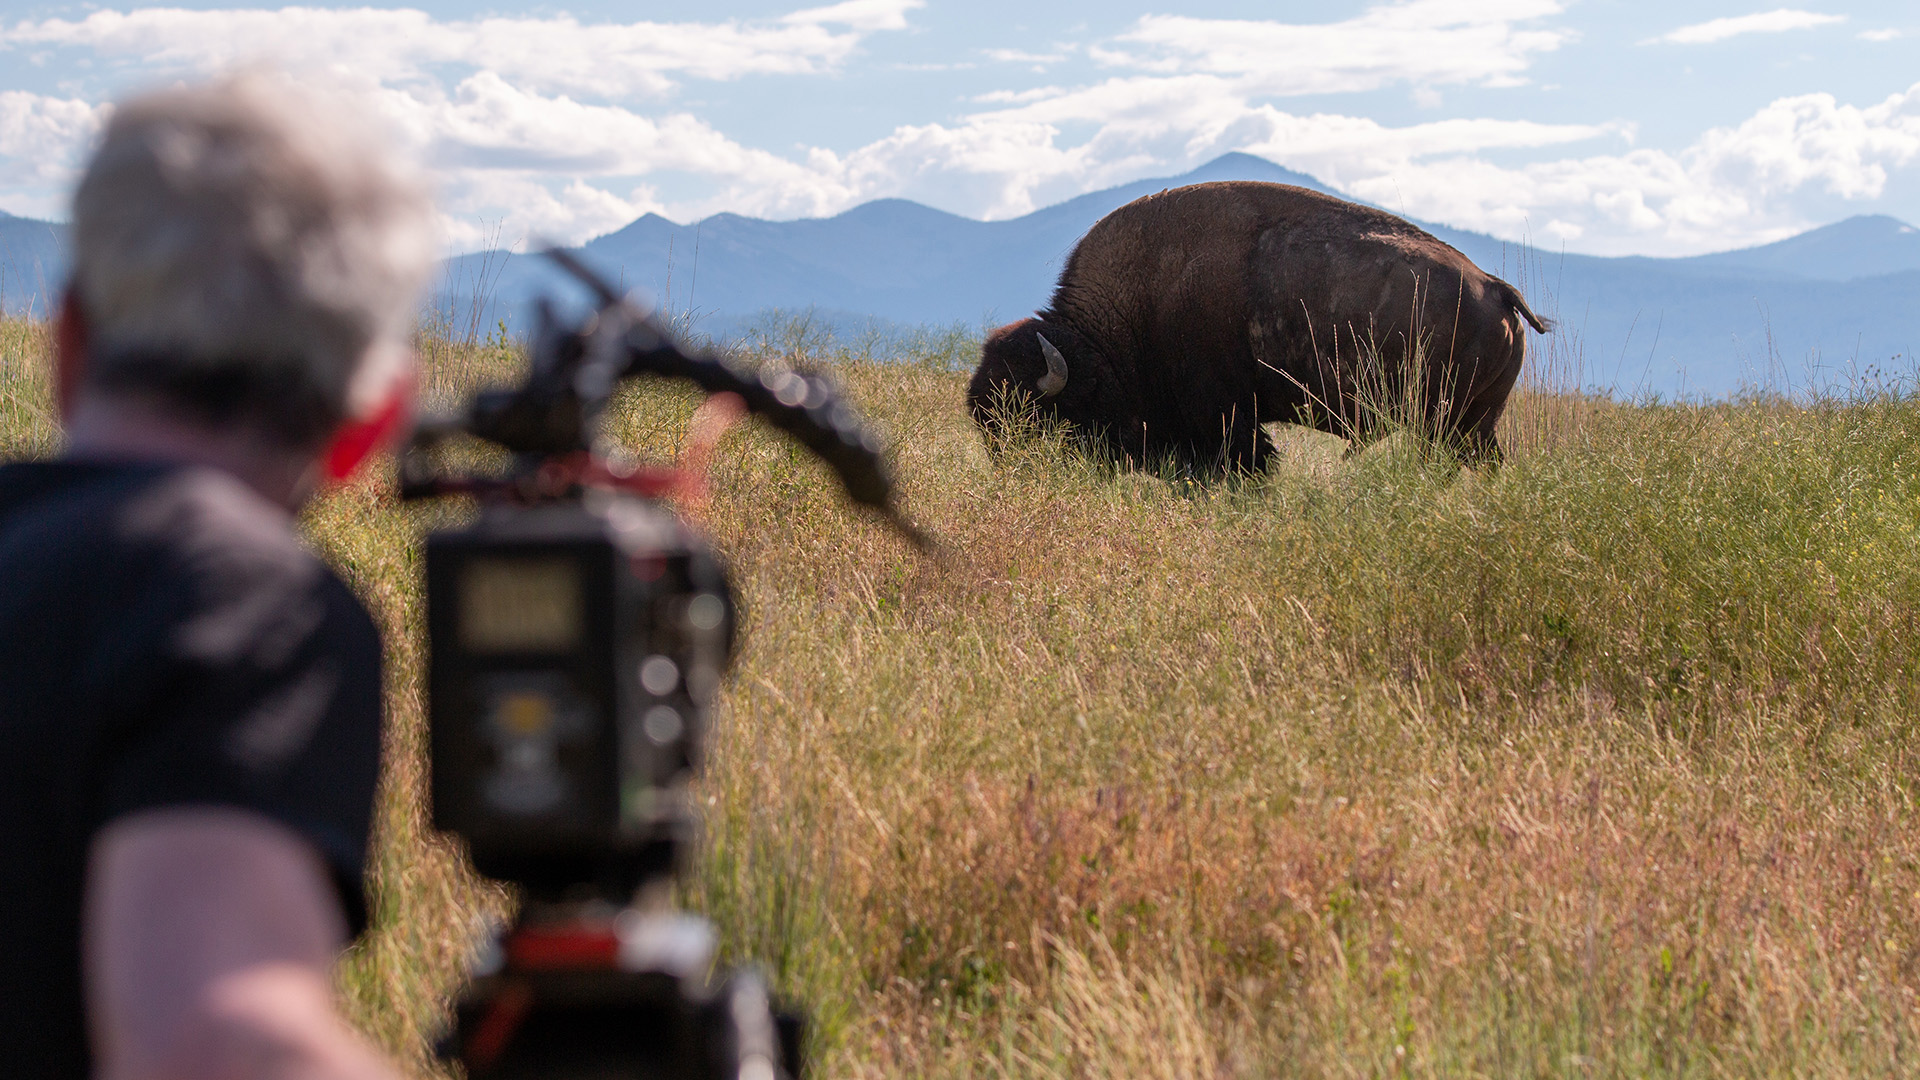 A videographer films a buffalo in the distance.